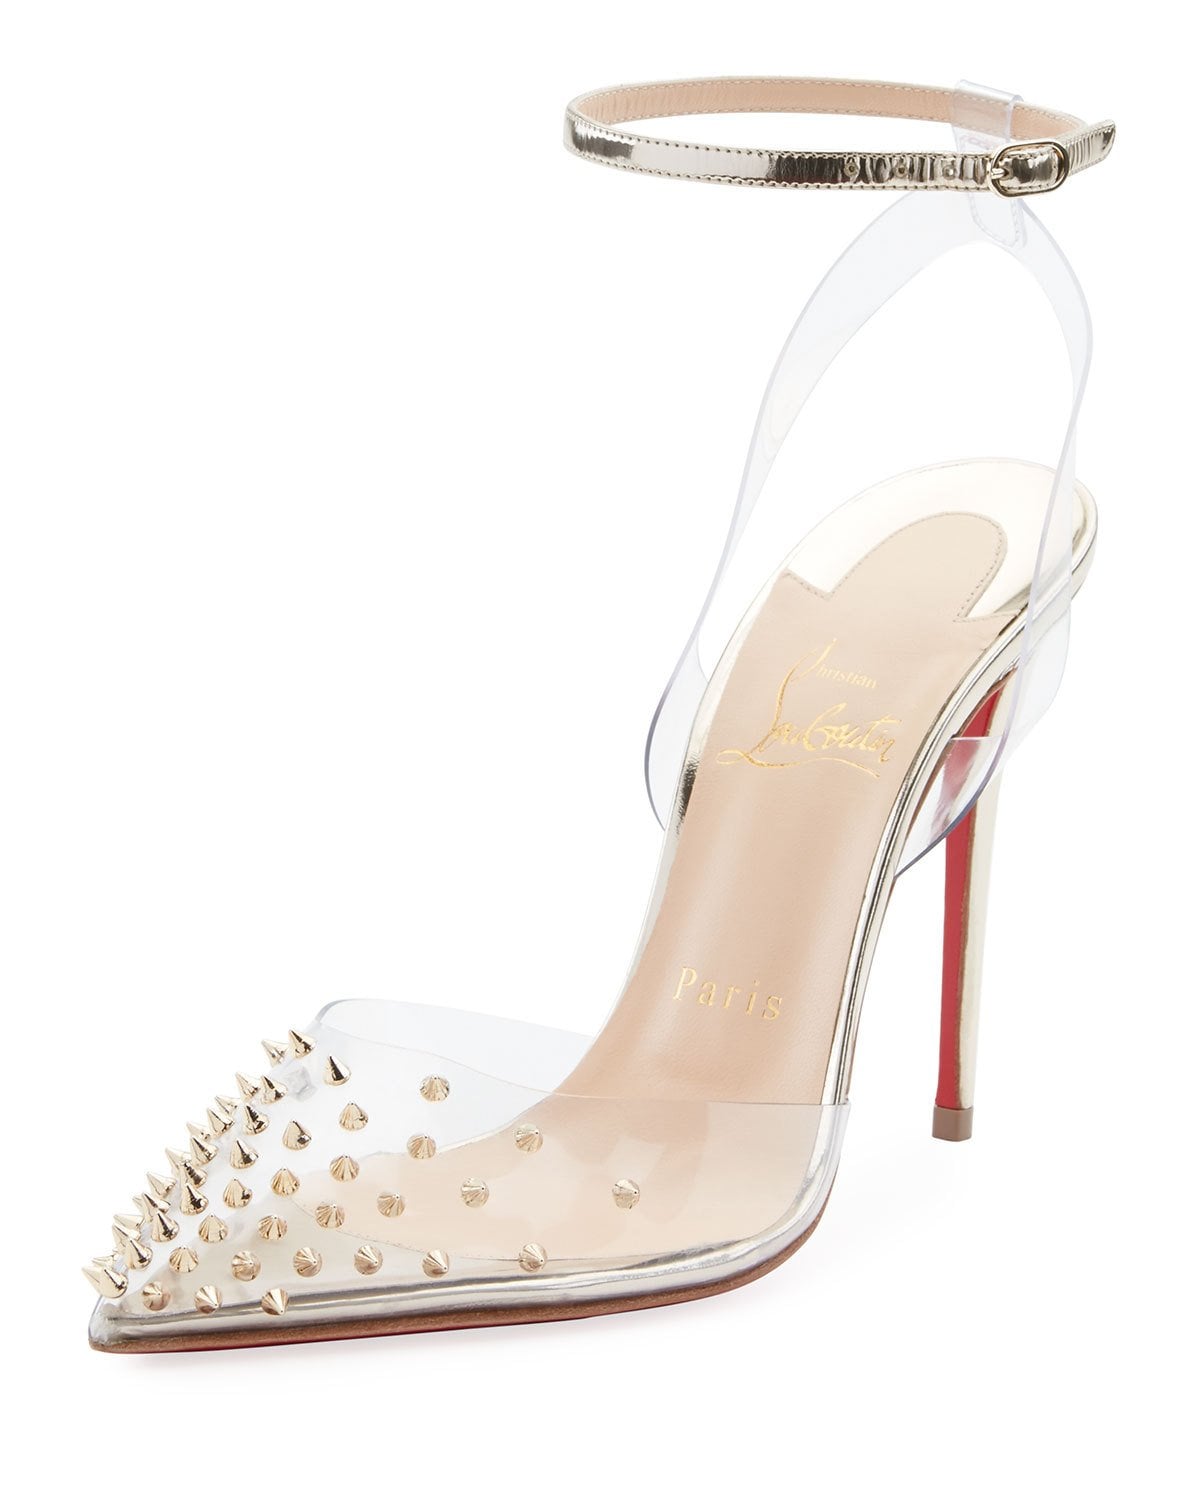 Sophie sejr forståelse Christian Louboutin Spikoo Spiked Ankle-Wrap Red Sole Pumps | Lady Gaga  Just One-Upped Cinderella With Her Glass Slippers | POPSUGAR Fashion Photo  17